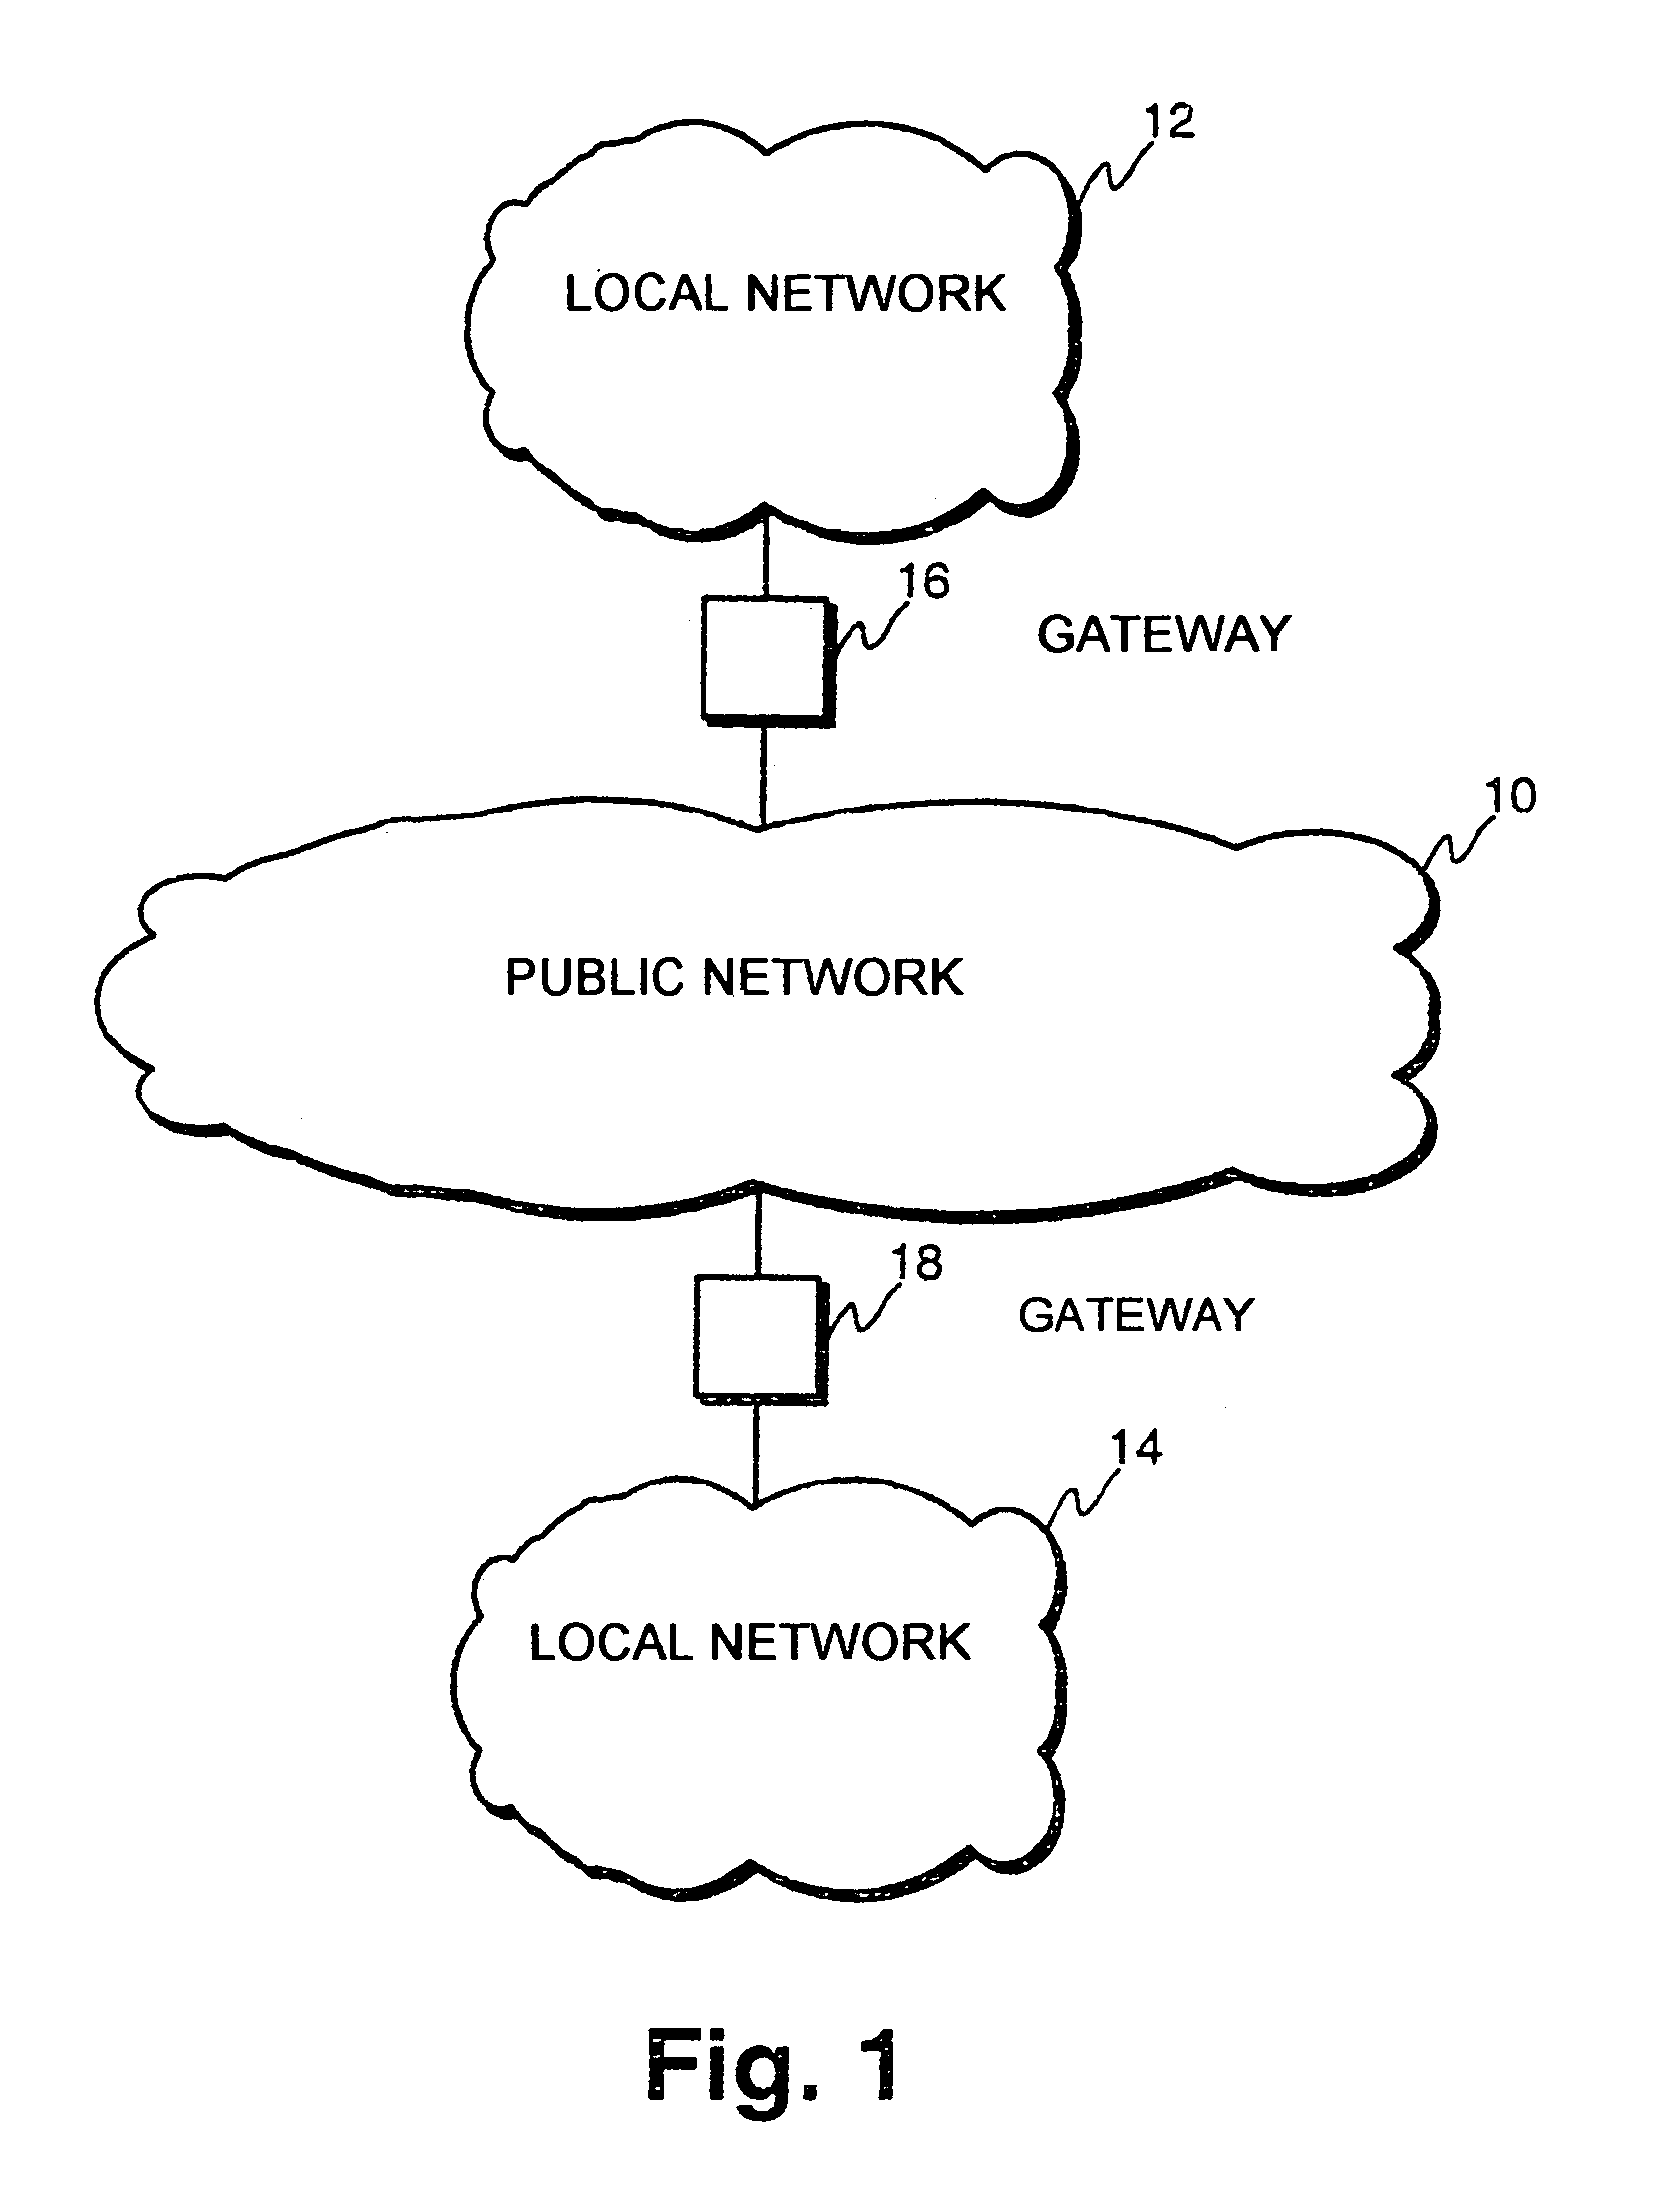 Screening of data packets in a gateway